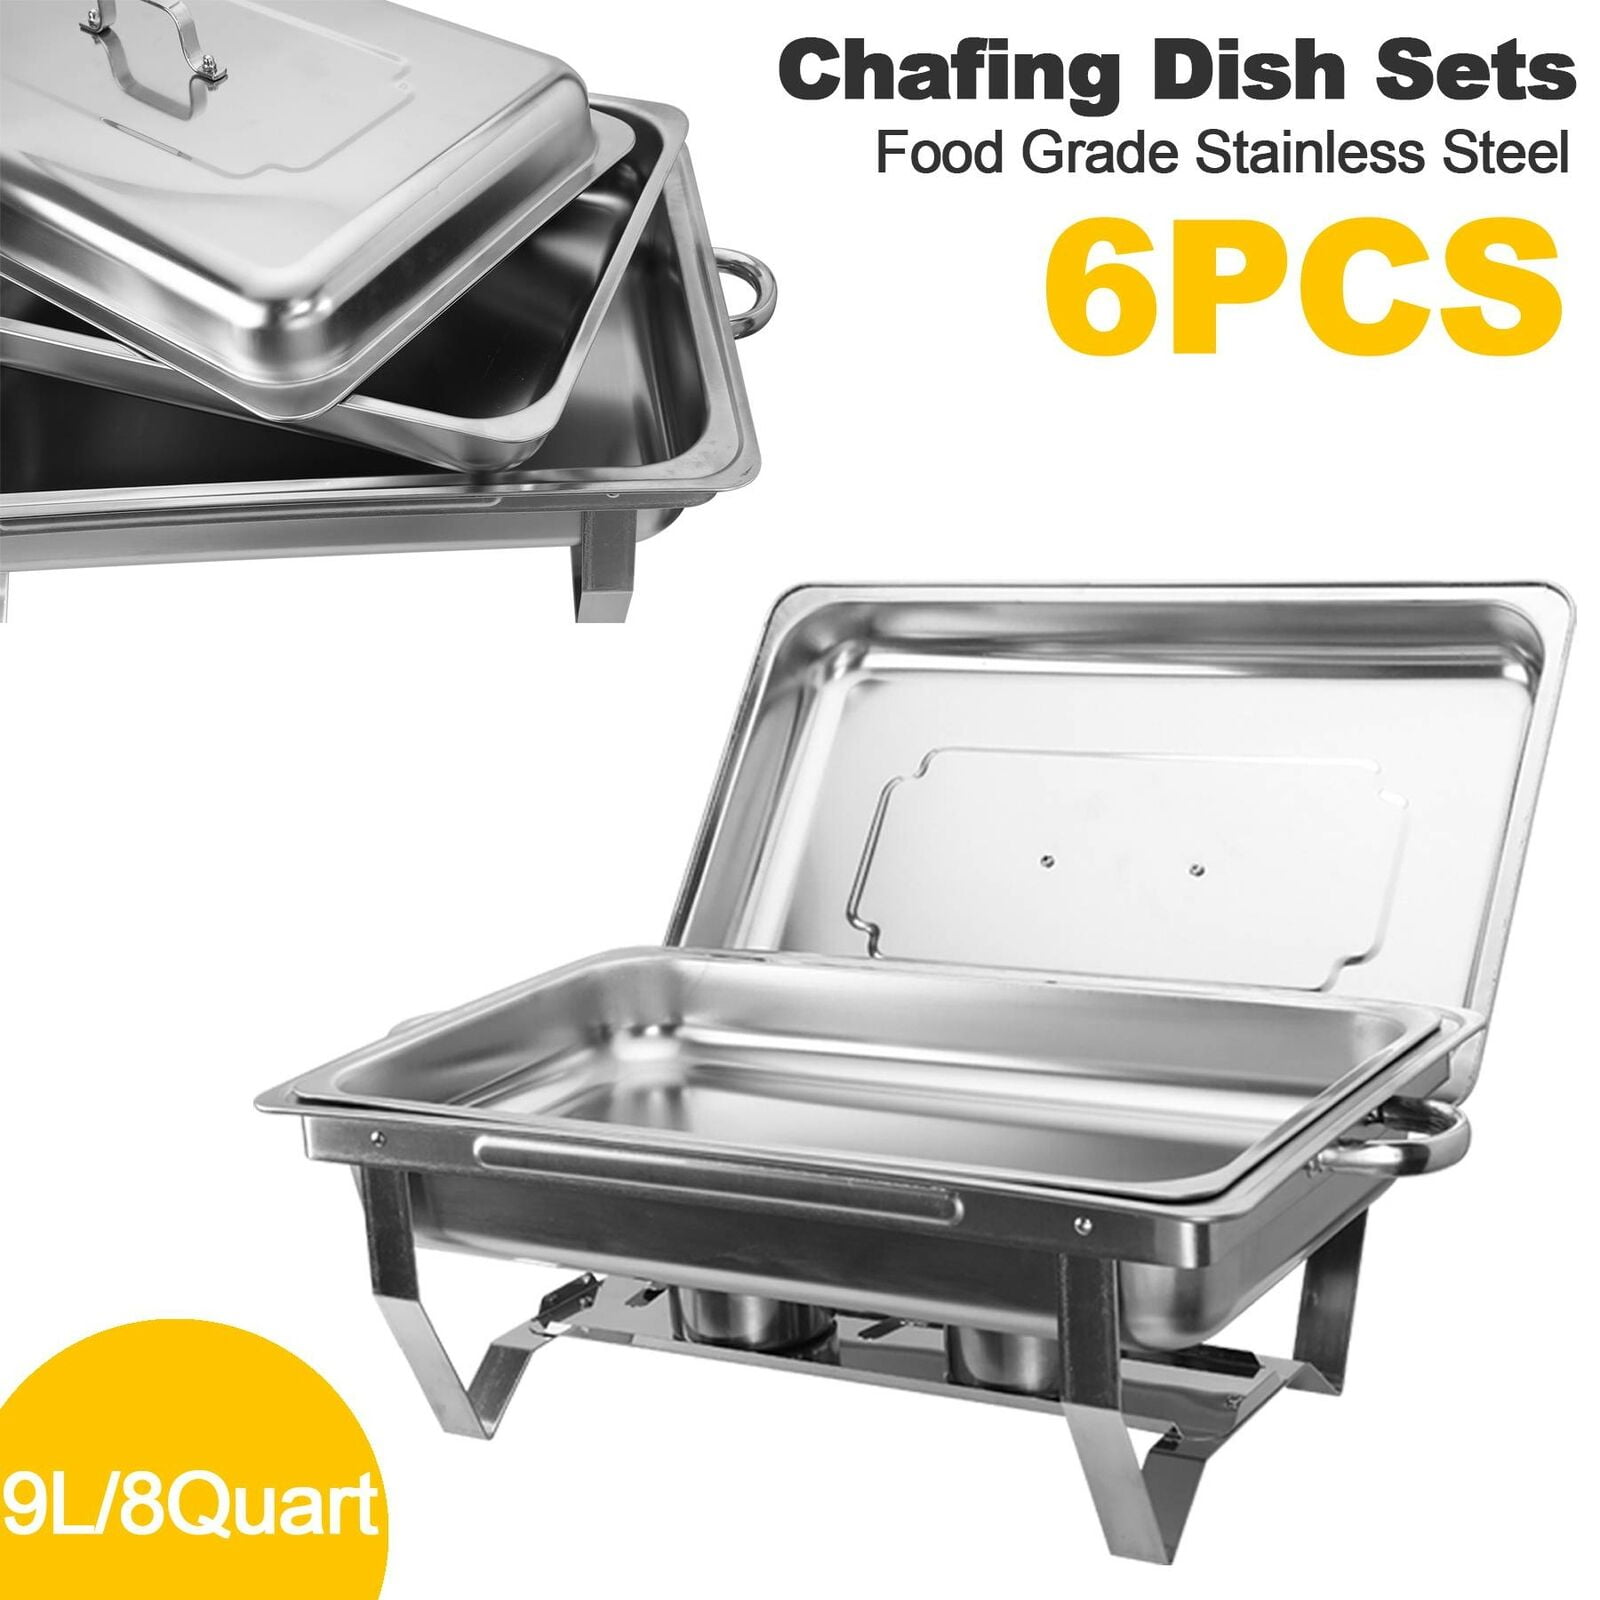 9L Commercial Catering Chafing Dish Sets Stainless Steel Food Warmer Buffet Pan 